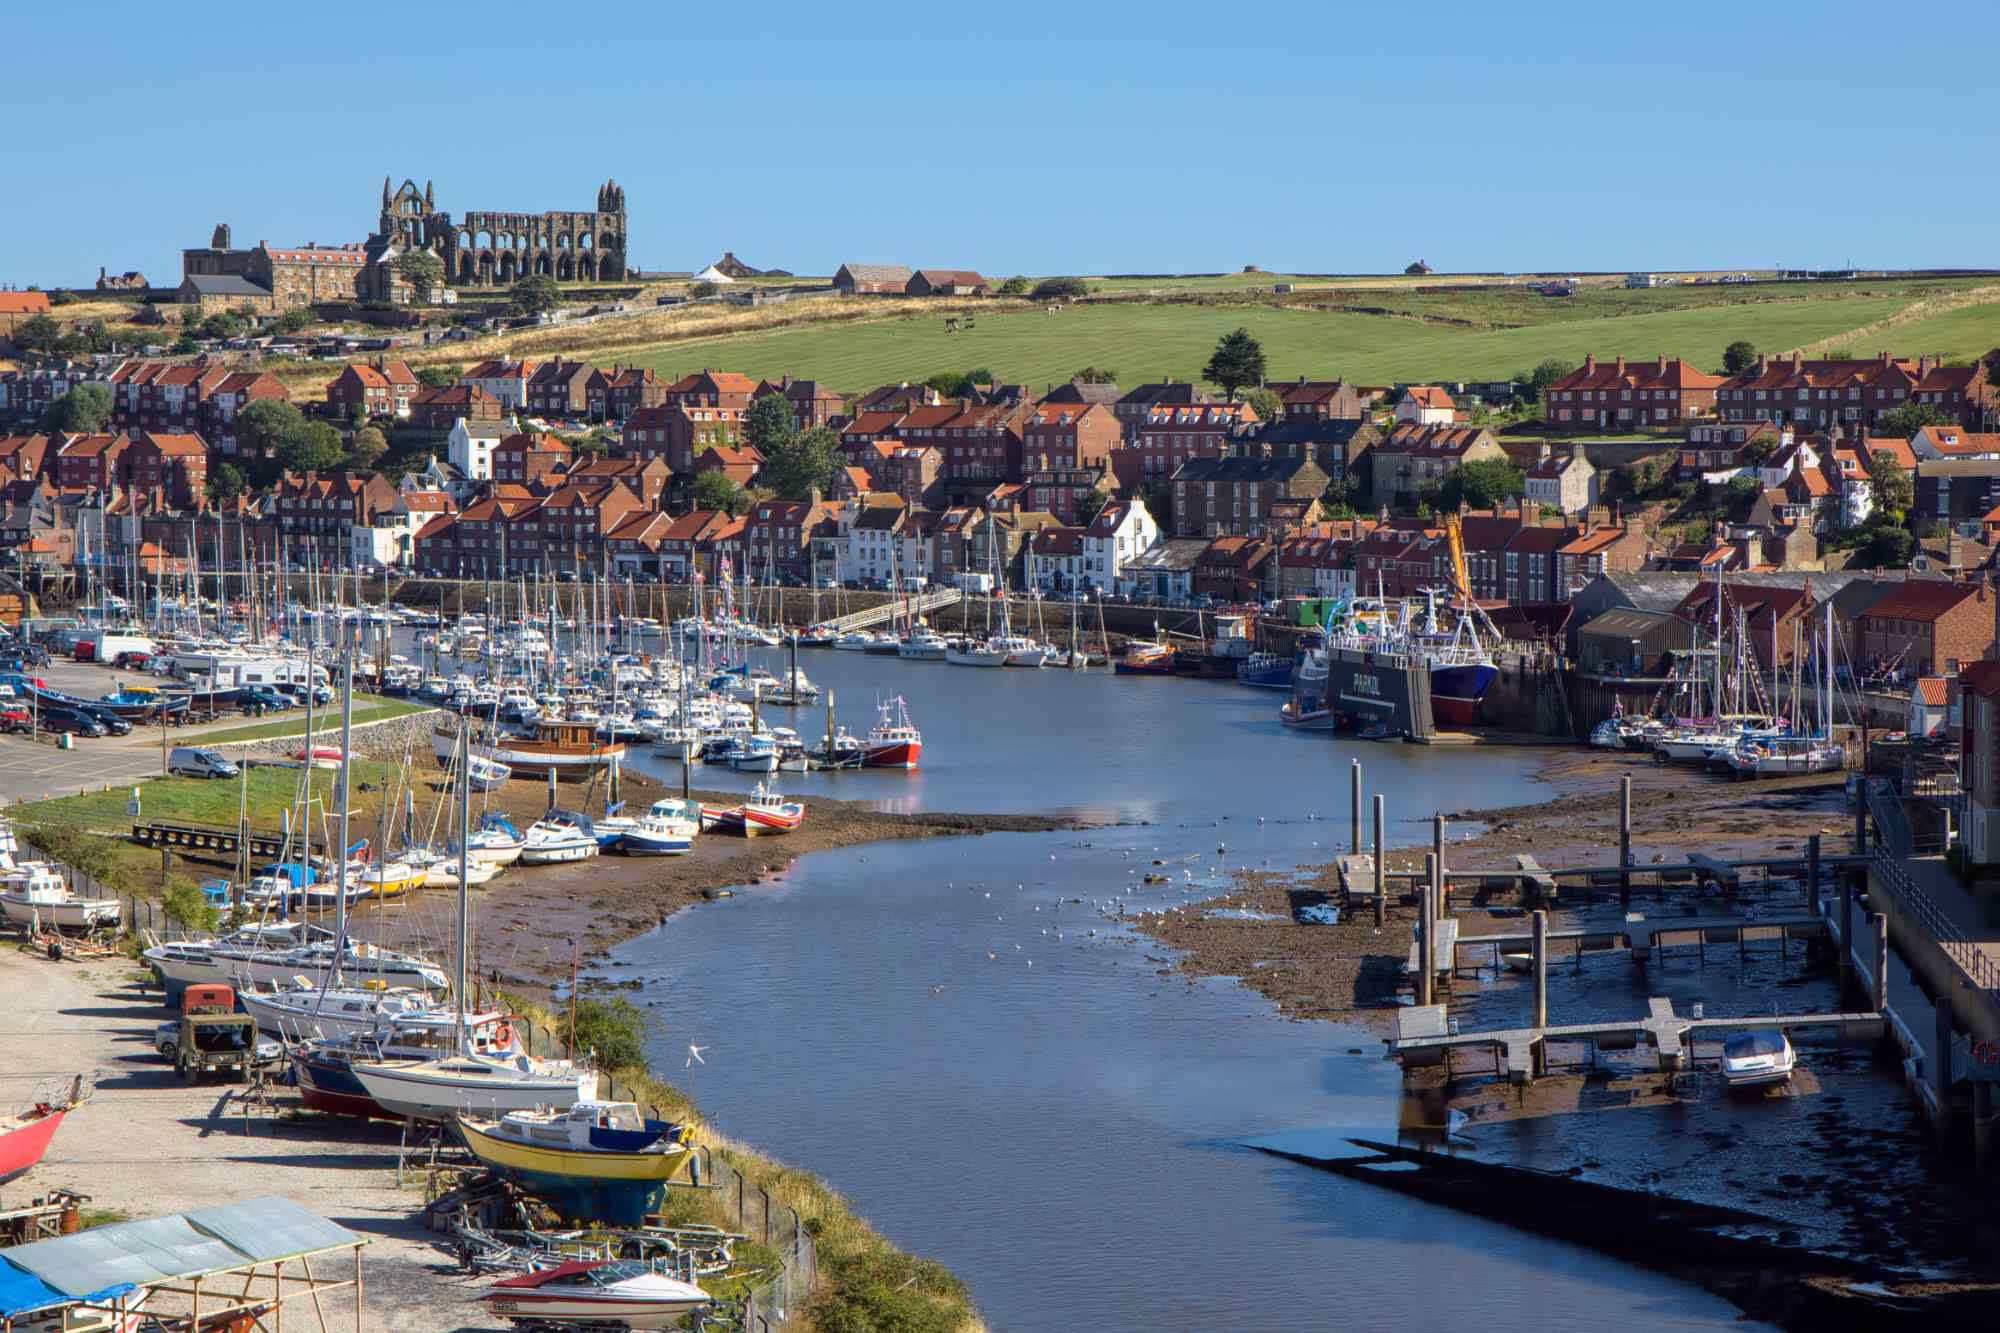 A pretty view of Whitby Harbour